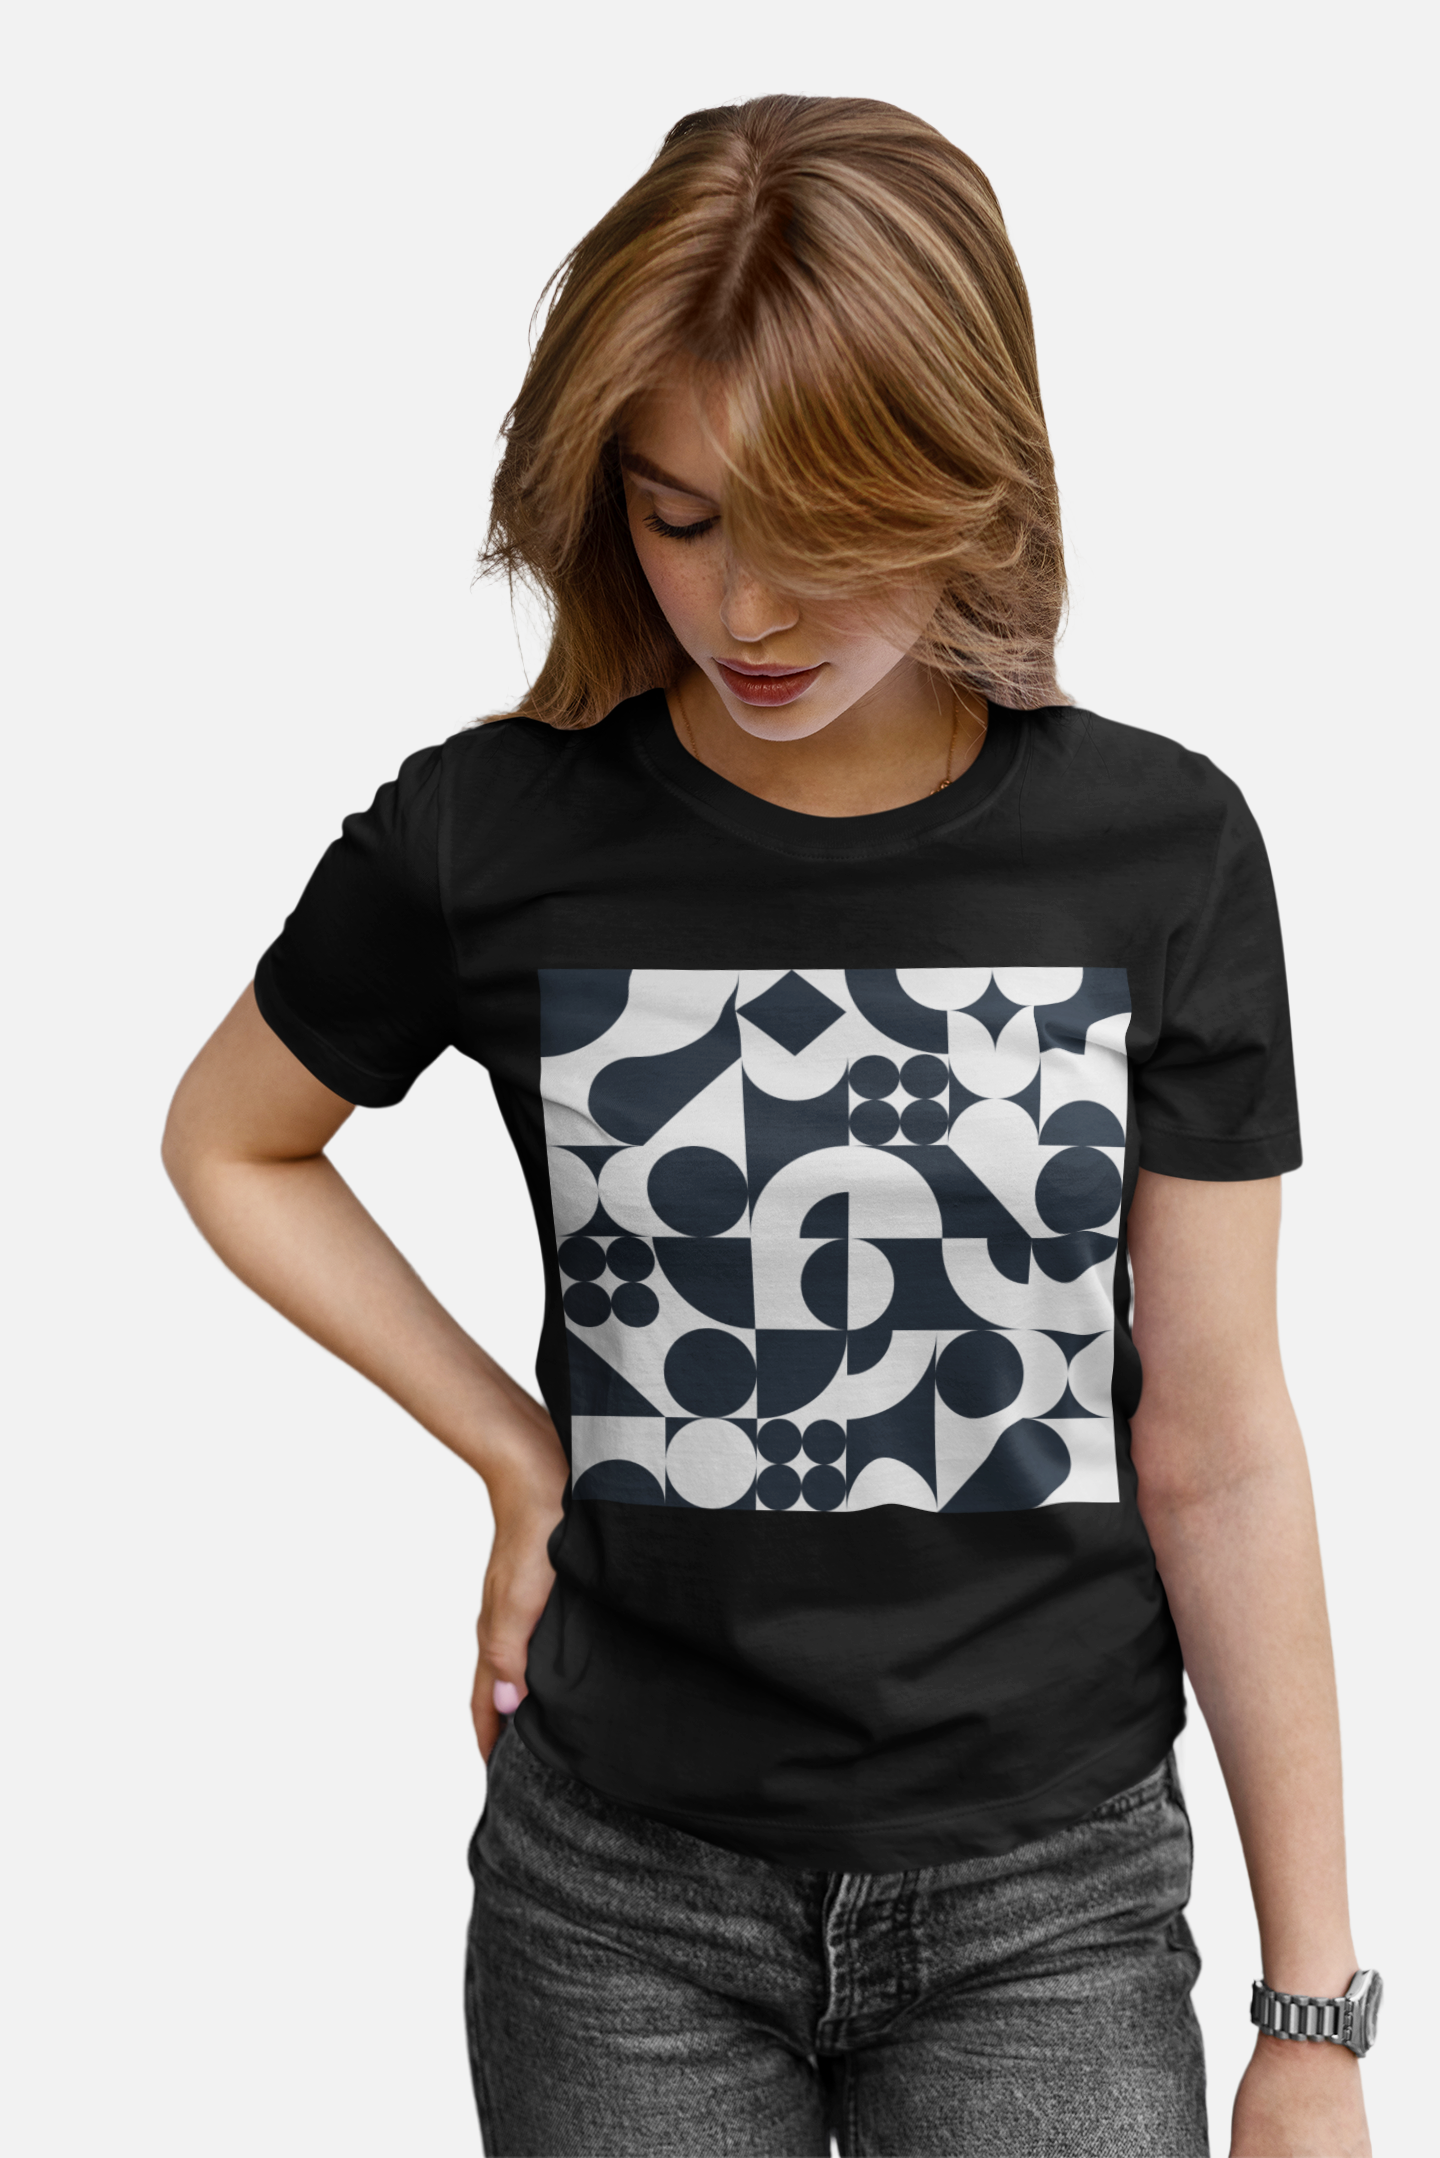 Black And White Abstract Pattern T-Shirt For Women